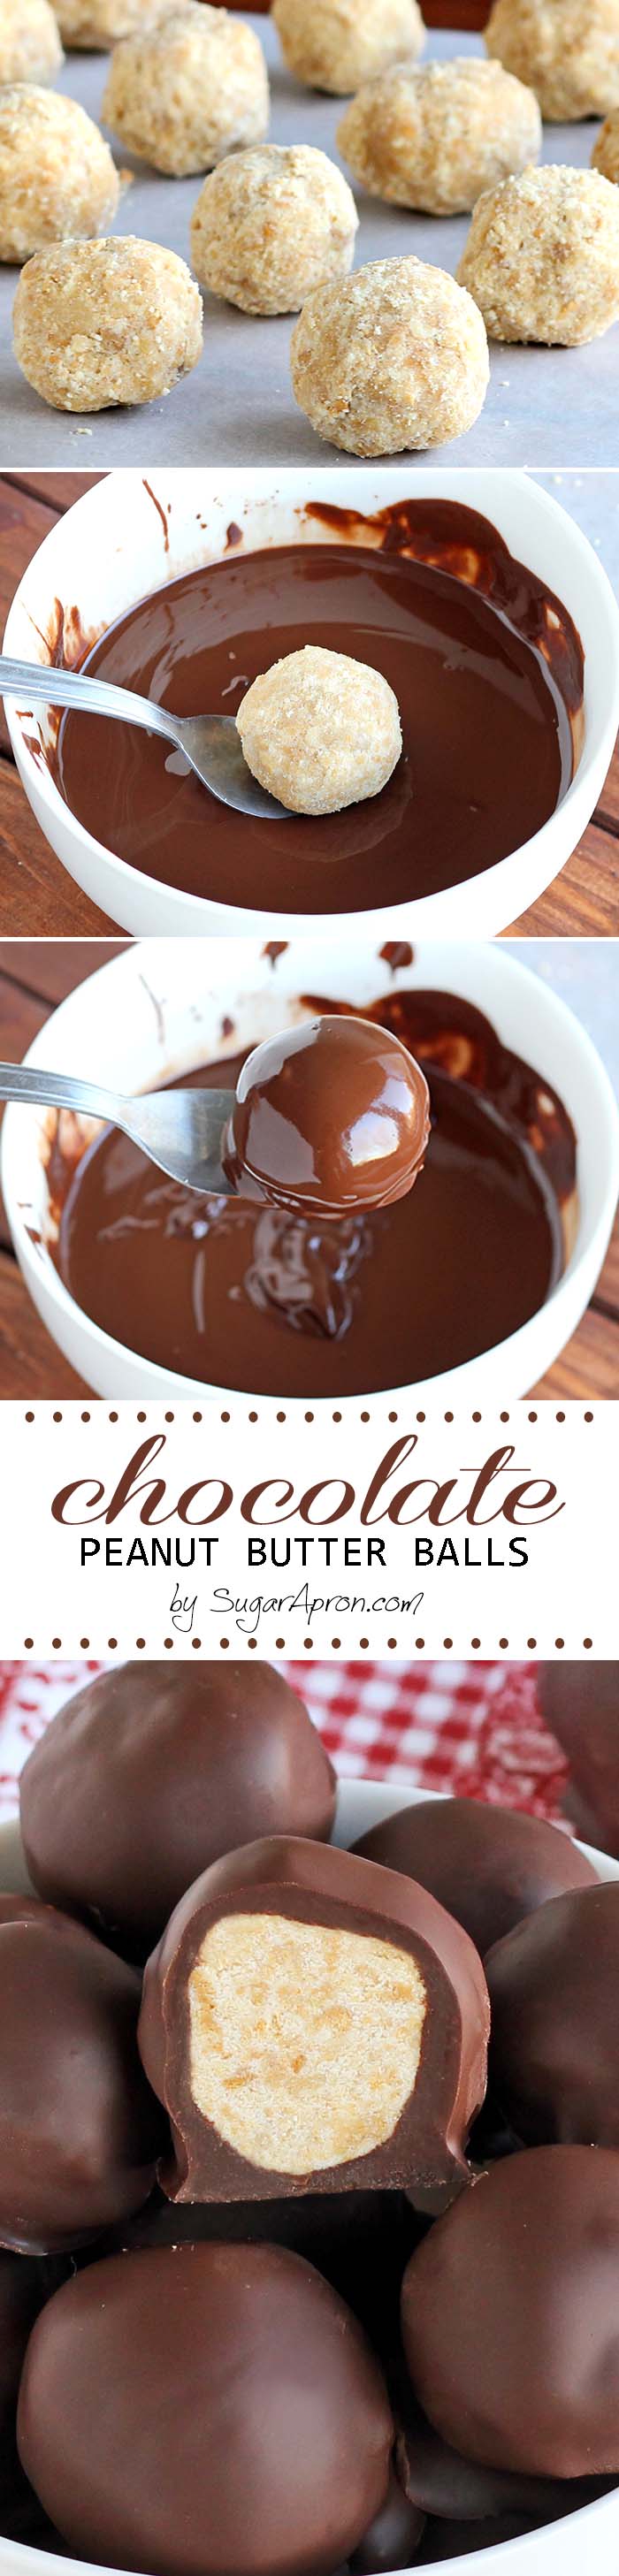 Chocolate Peanut Butter Balls only require a few ingredients and they are so easy to whip up. Oh, and they’re super addicting....like chips...I bet, you can’t eat just one.